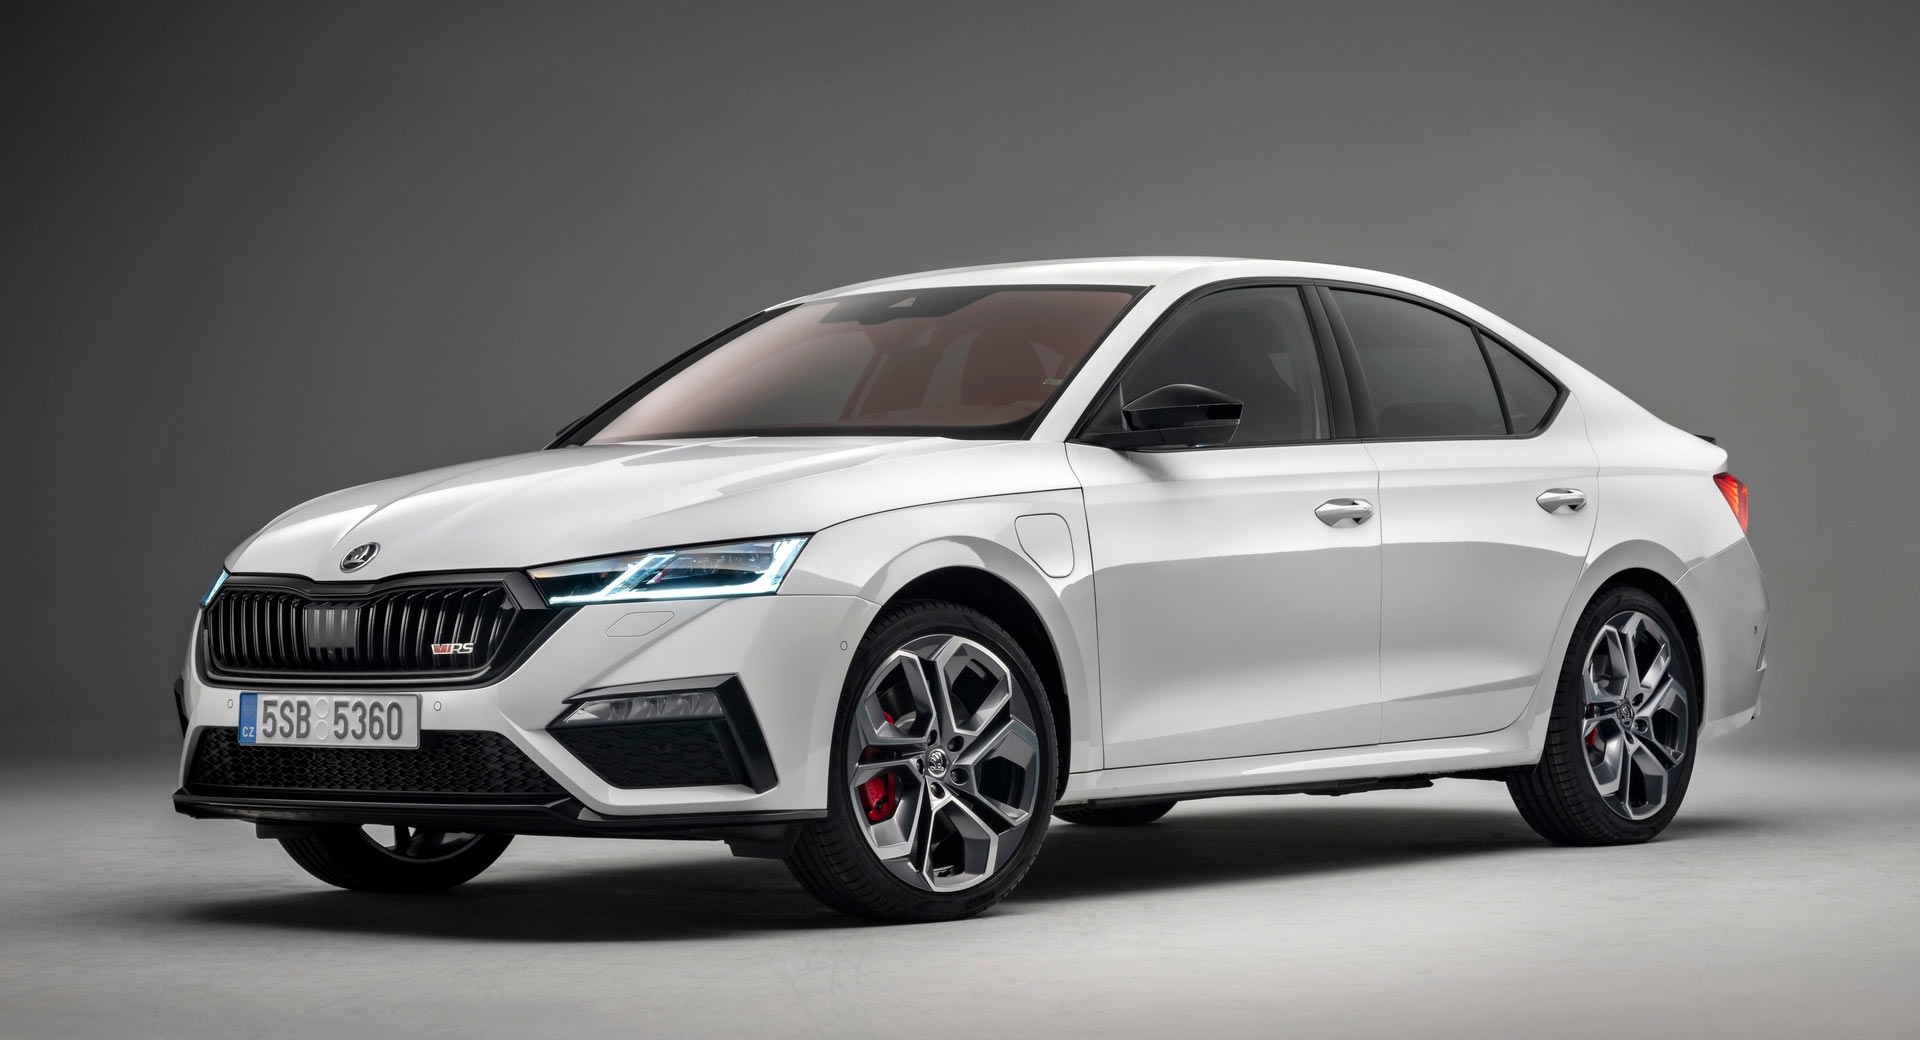 All-New Electrified 2020 Skoda Octavia RS iV Is Both Driver And